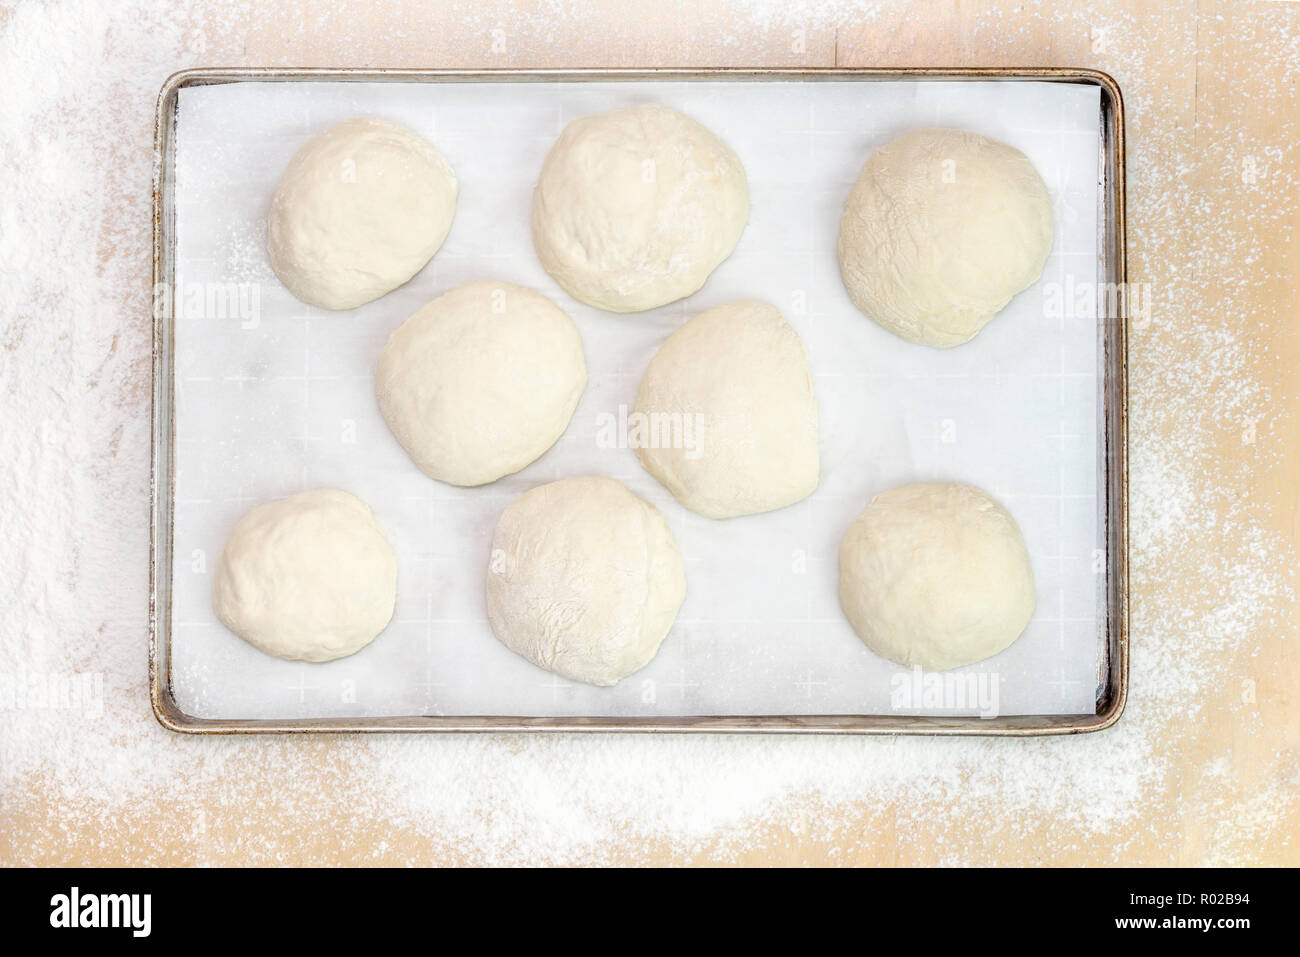 Balls of dough on parchment paper, on a metal tray on a wooden table covered with white flour. View from above. Stock Photo